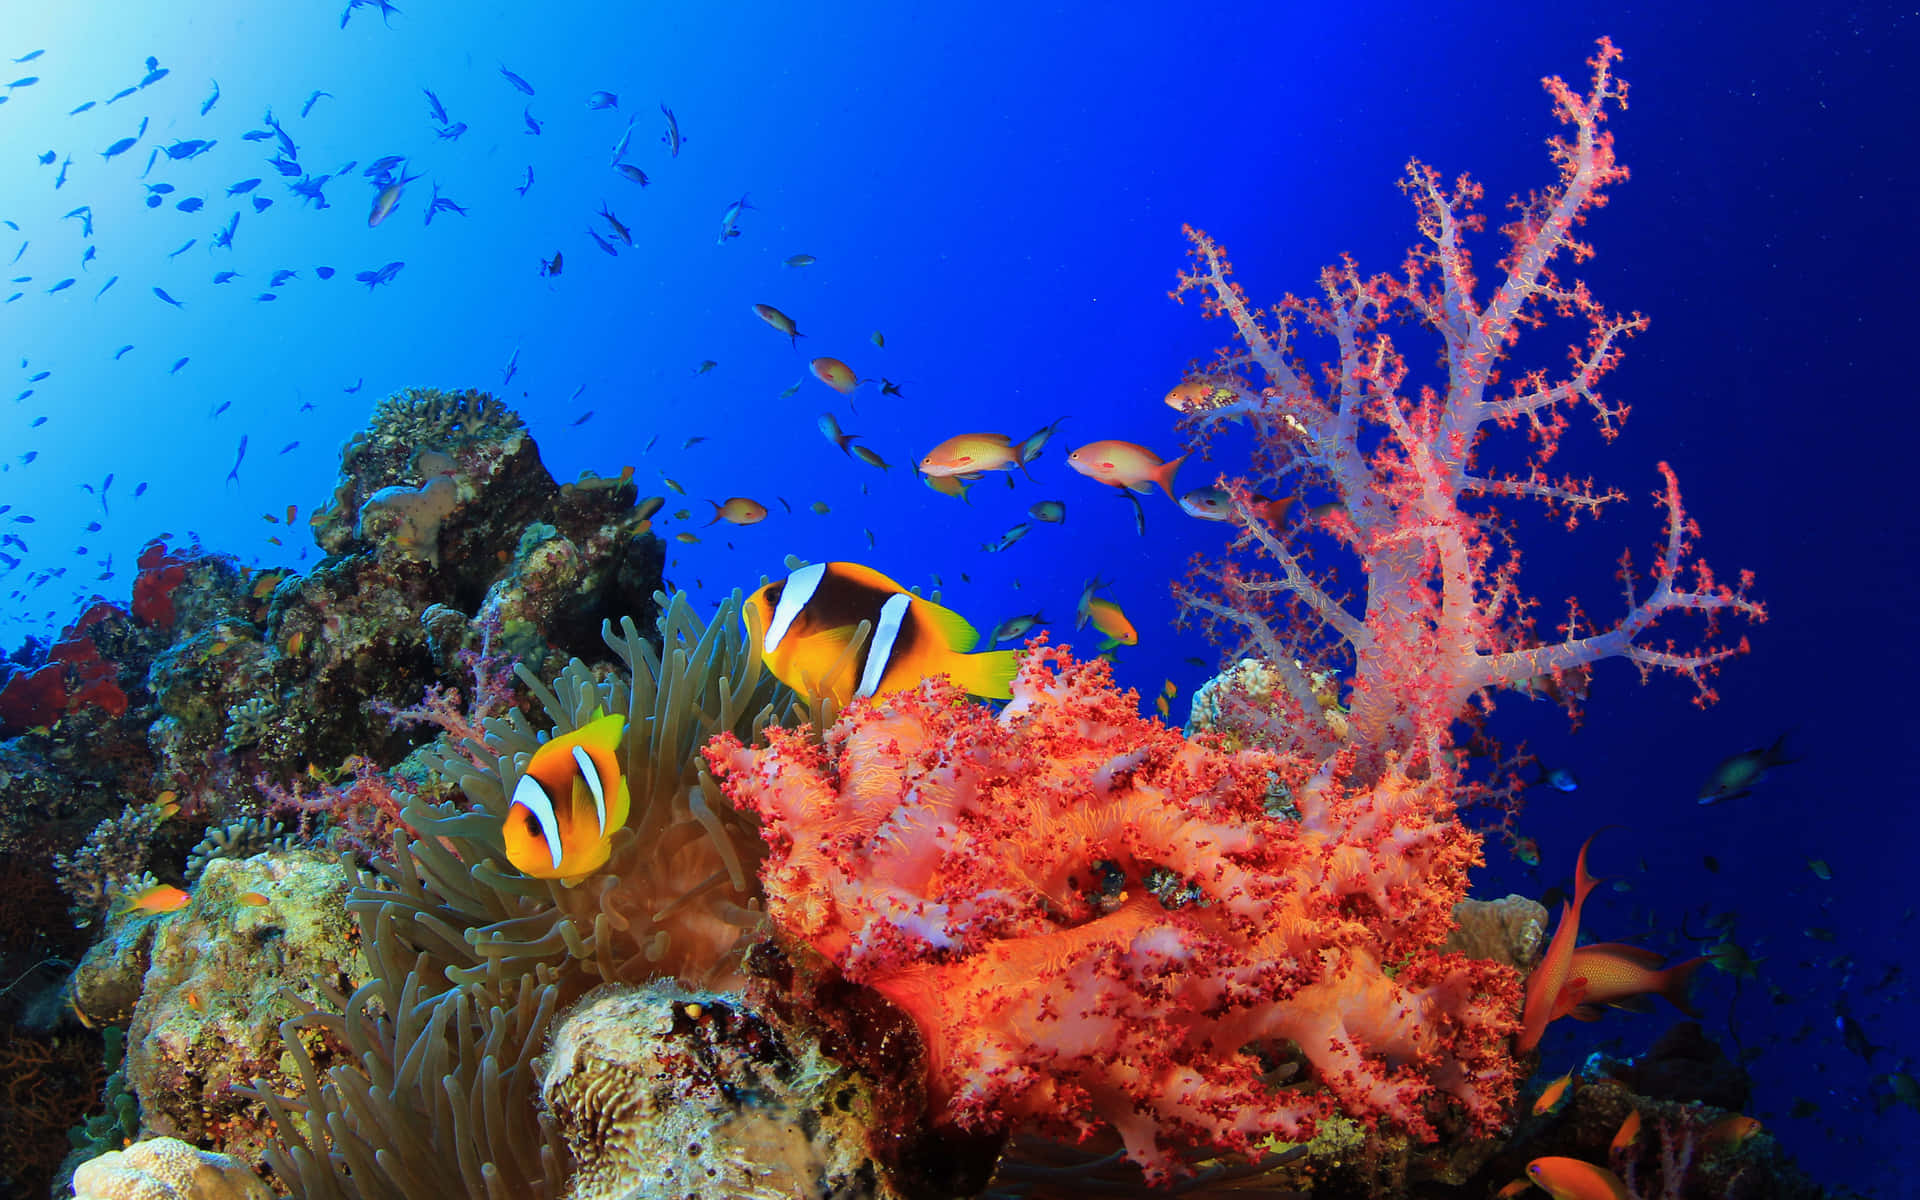 Bright, vibrant coral in a peaceful underwater world.